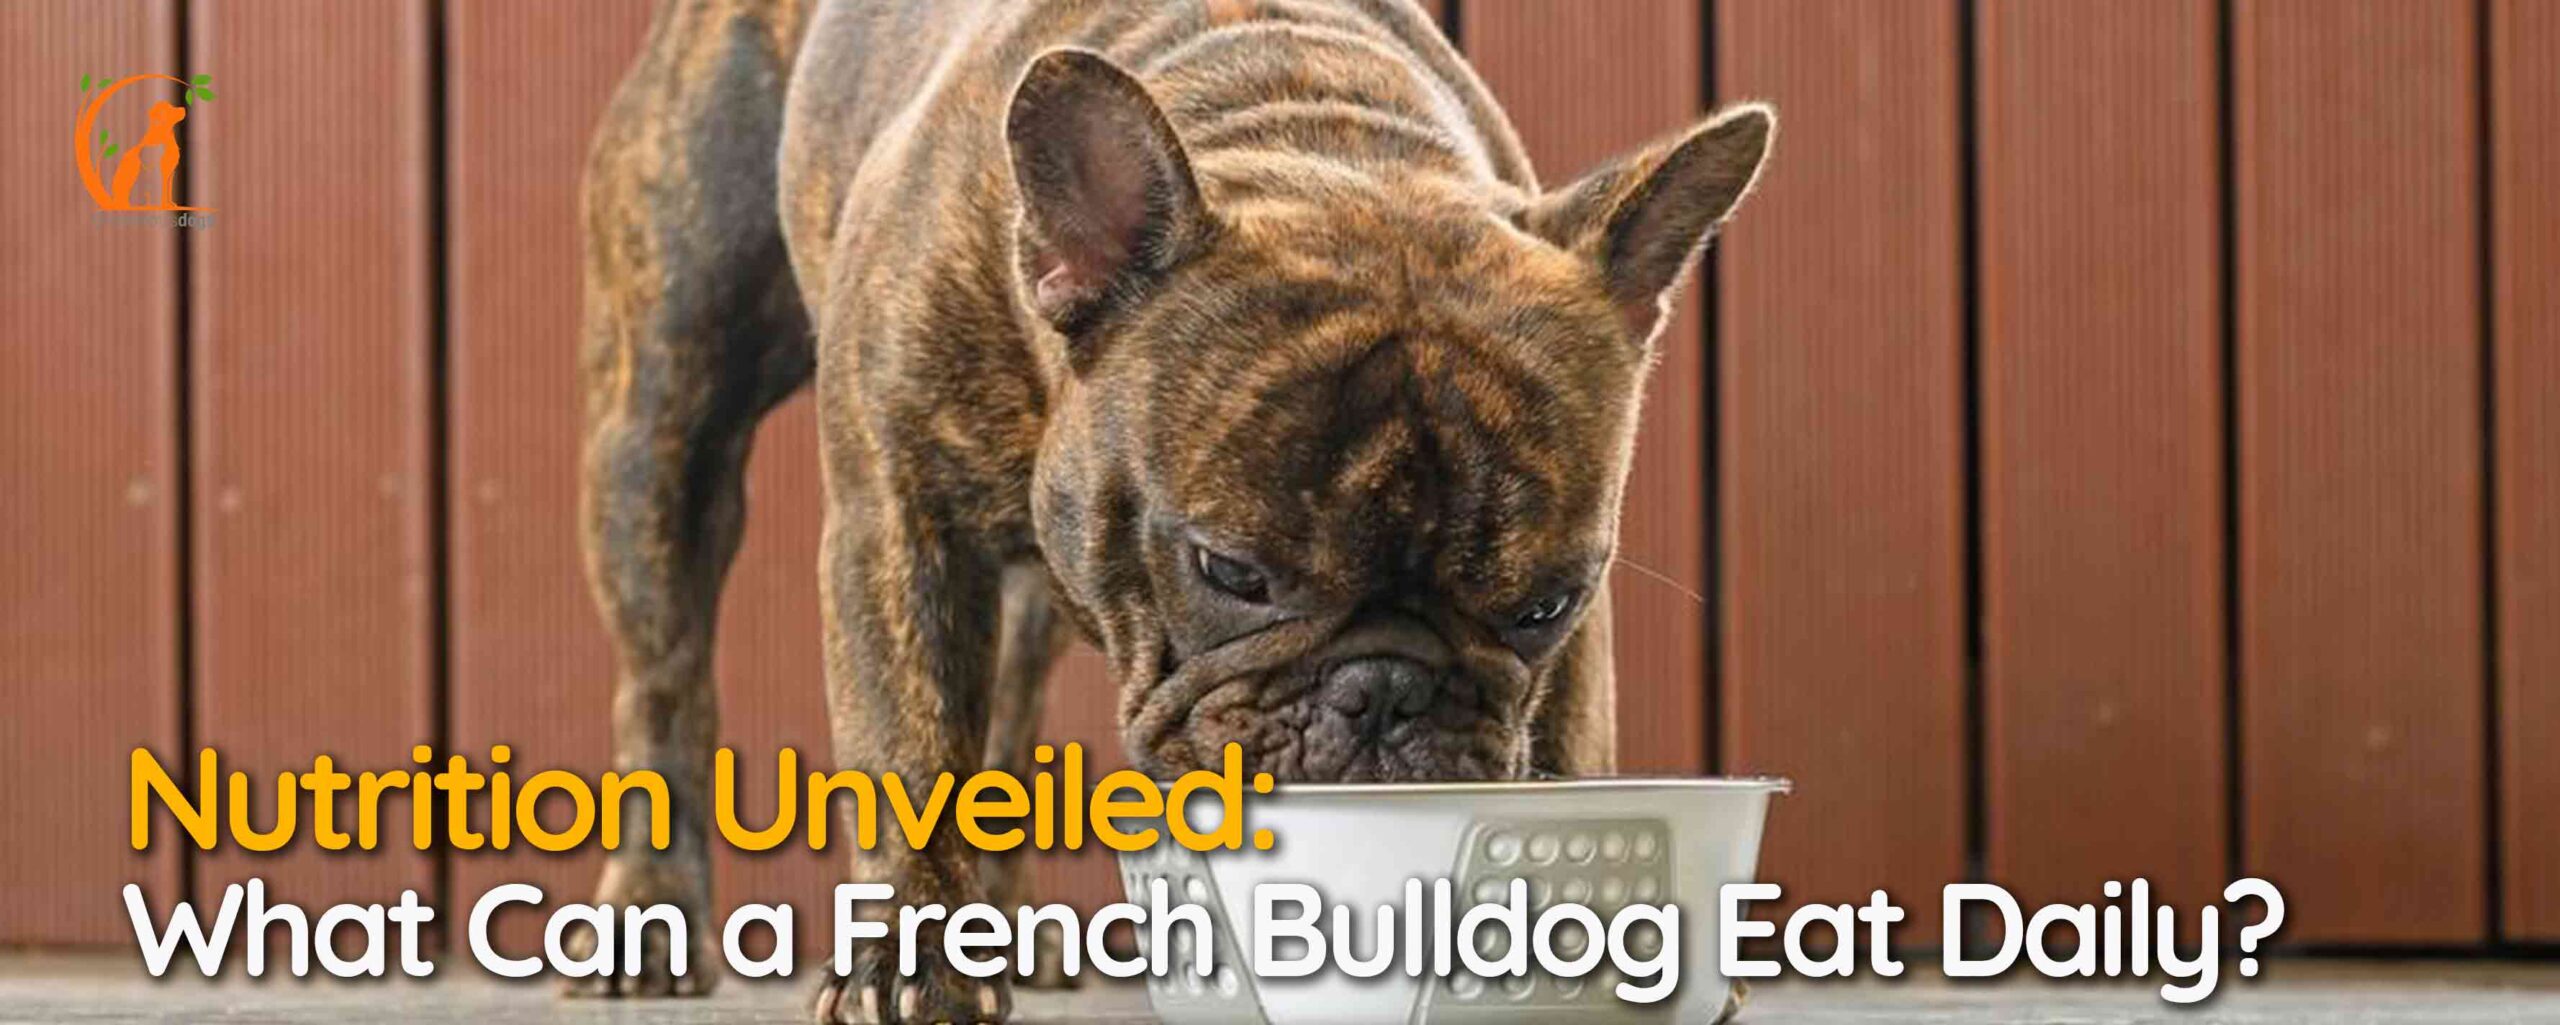 Nutrition Unveiled: What Can a French Bulldog Eat Daily?